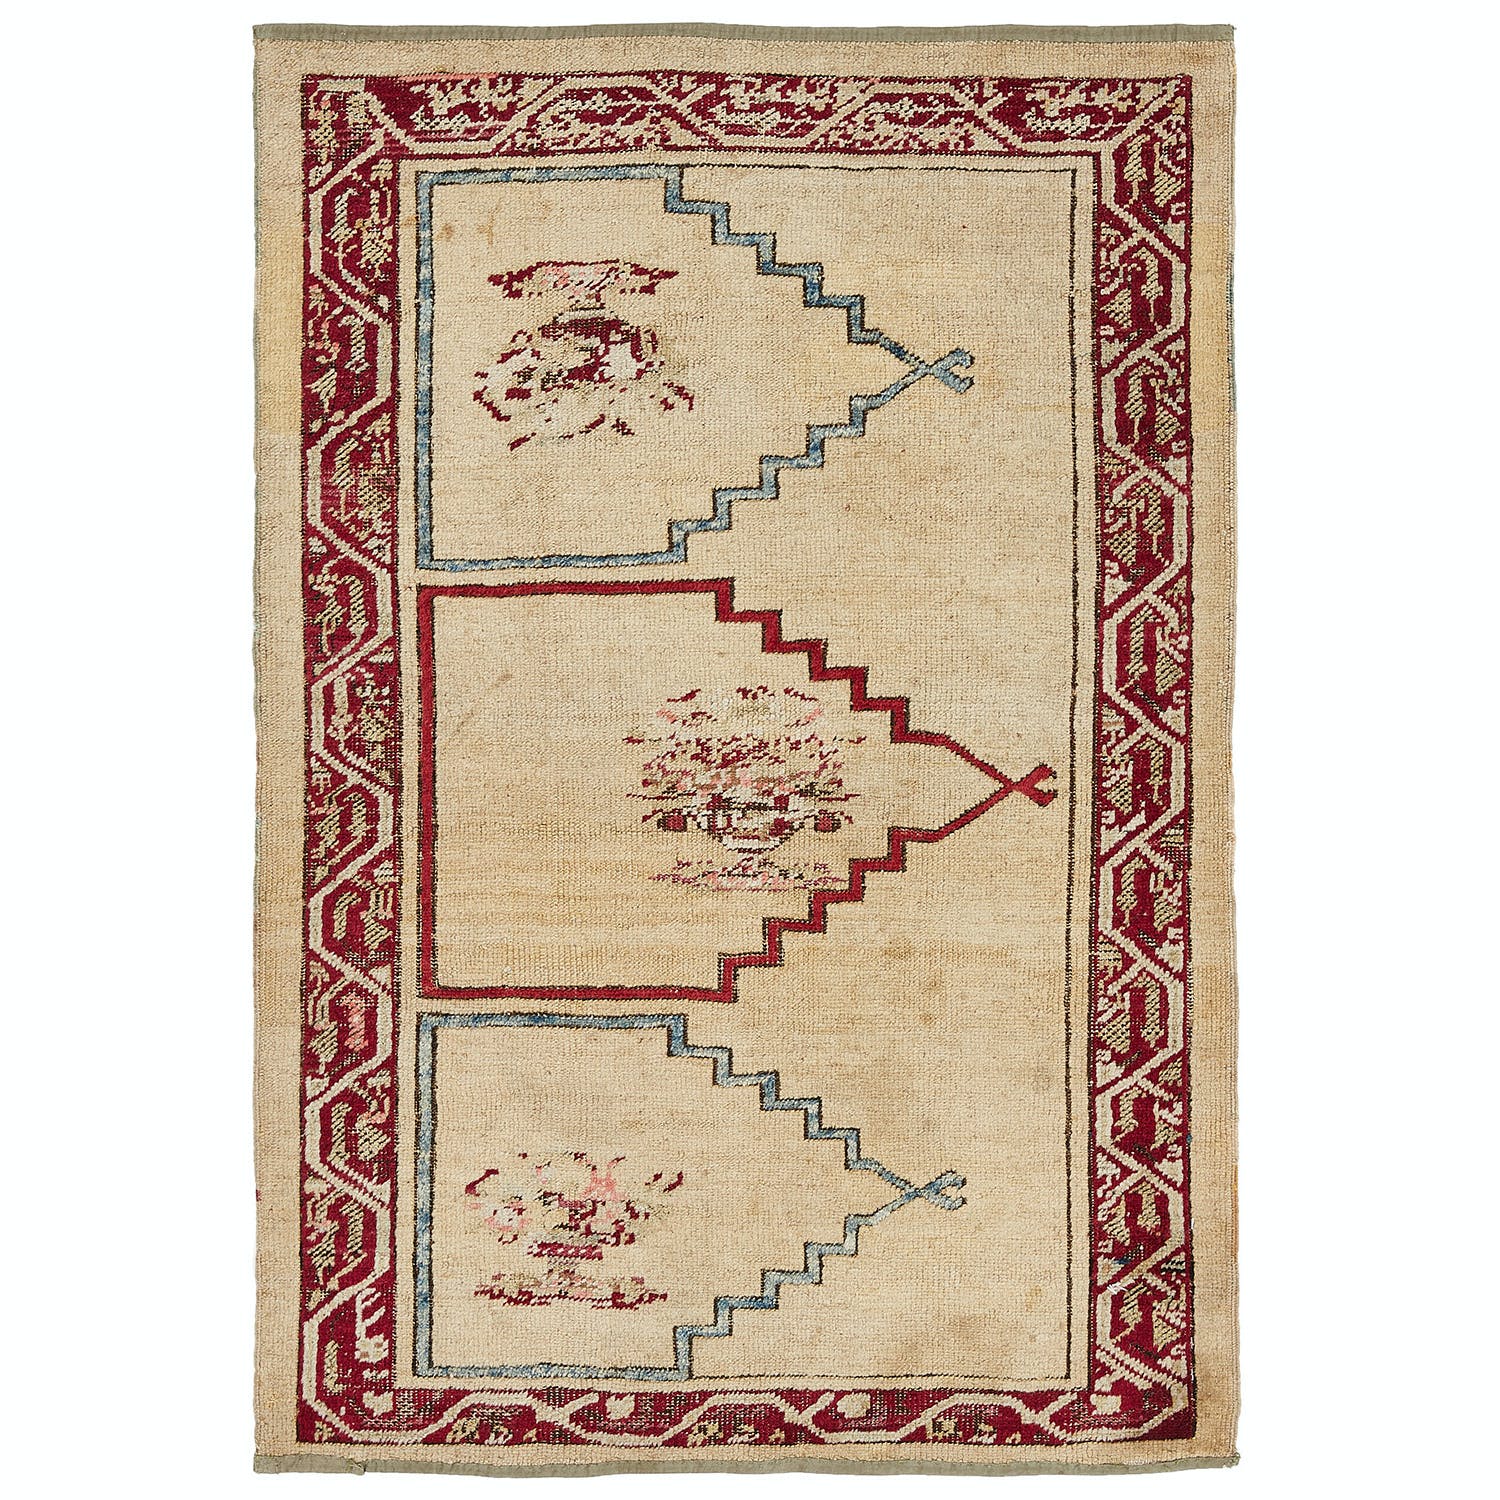 Traditional rug with distinctive pattern showcases Middle Eastern or Central Asian influences.